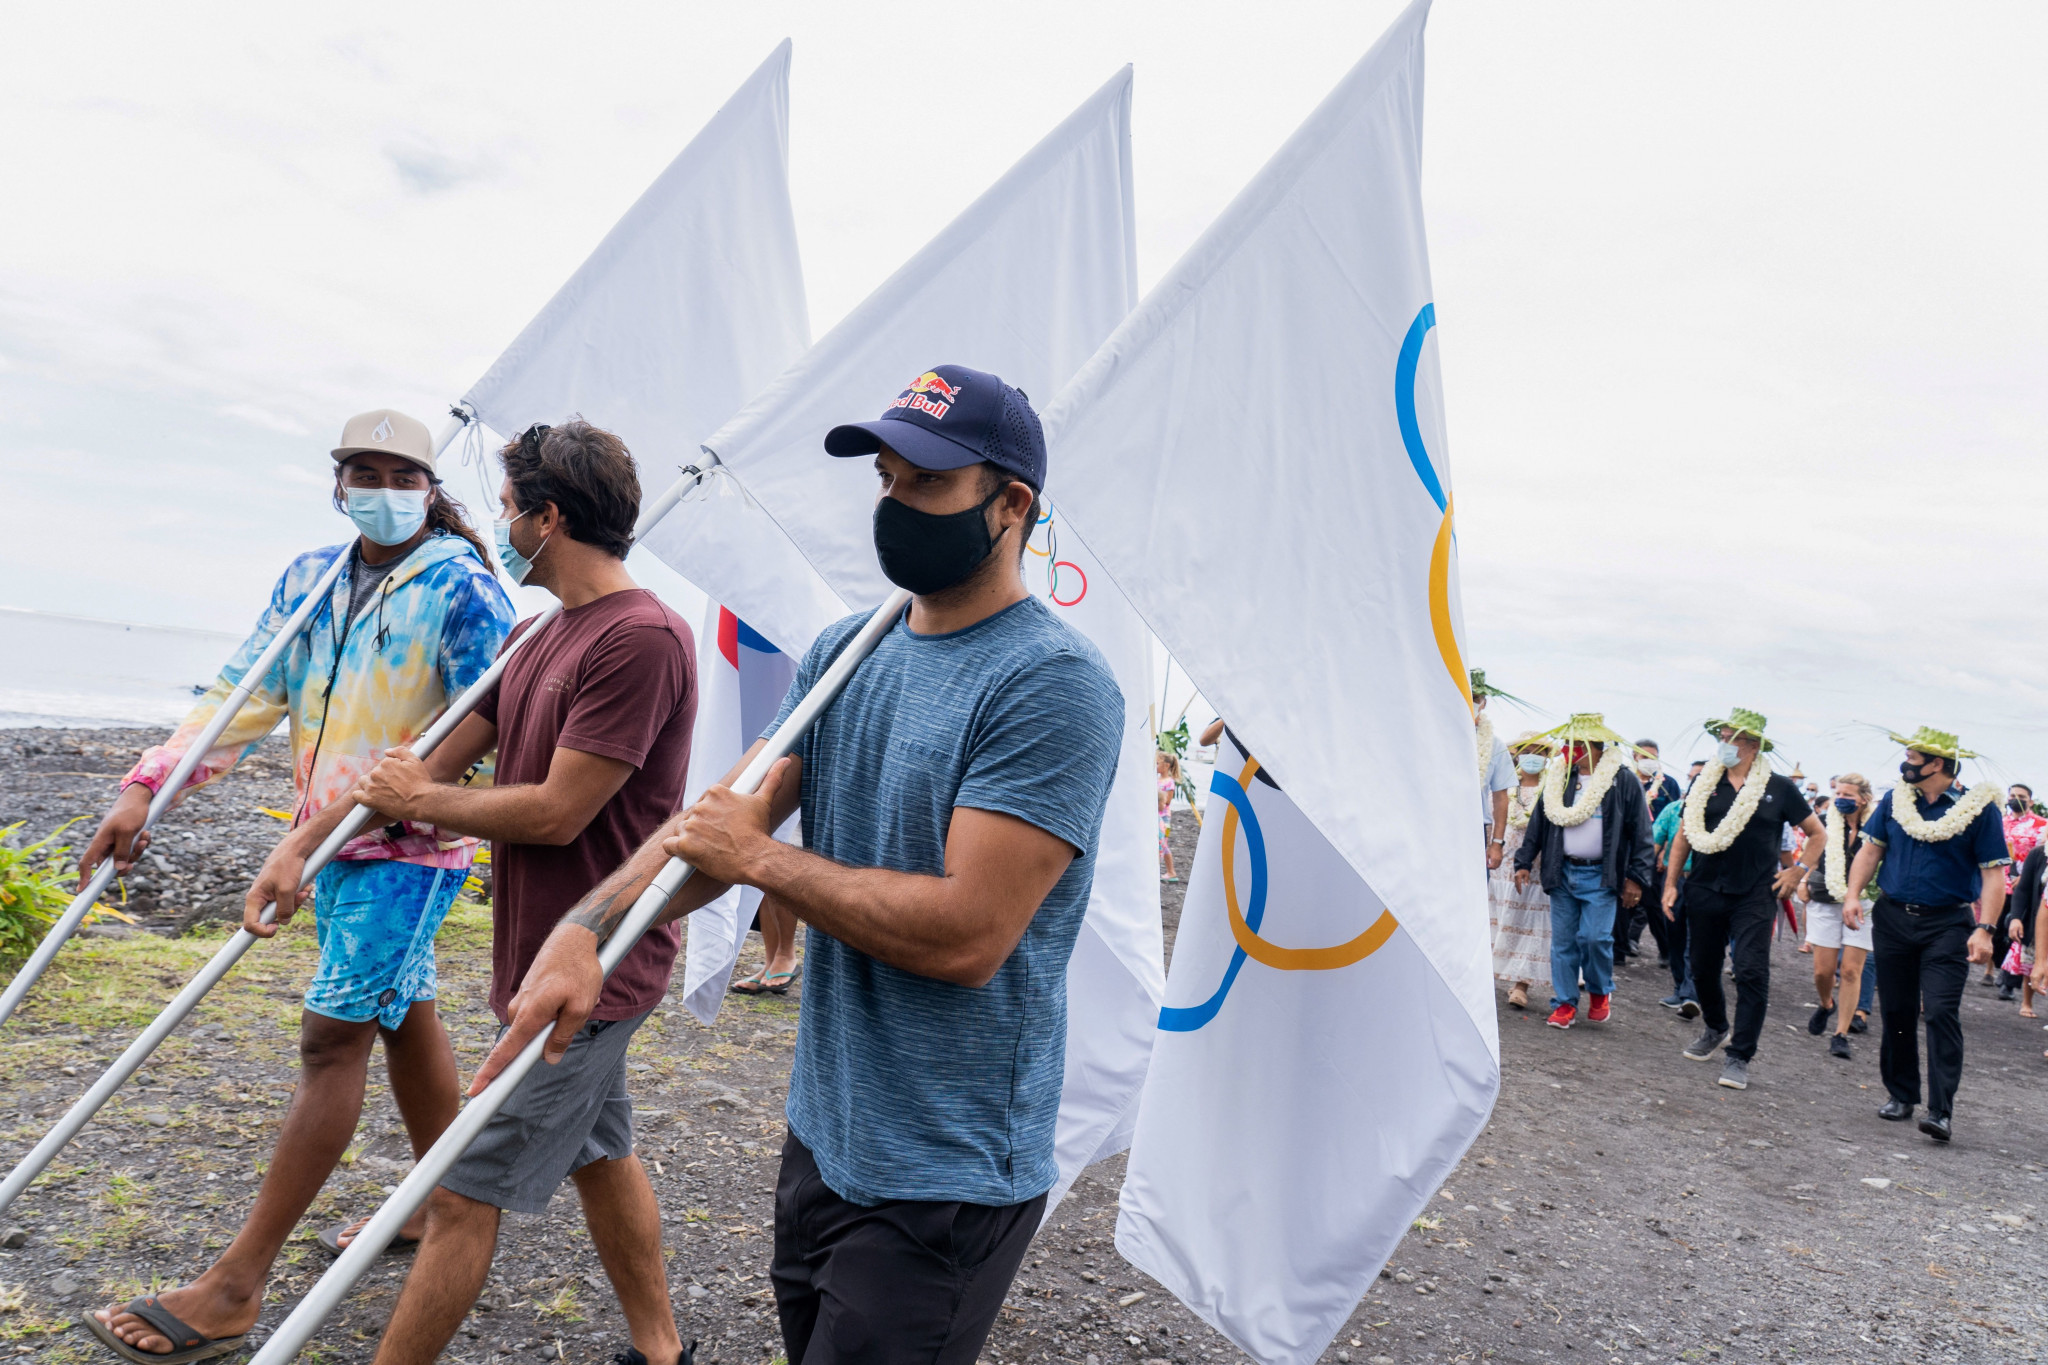 The Tahitian Matehau Tetopata, a young local surfer from Teahupo'o, left, the Reunionese Jeremy Flores, centre and the Tahitian Michel Bourez, right, walk and hold the three Olympic flags as they attend a cultural ceremony organised by the population to w